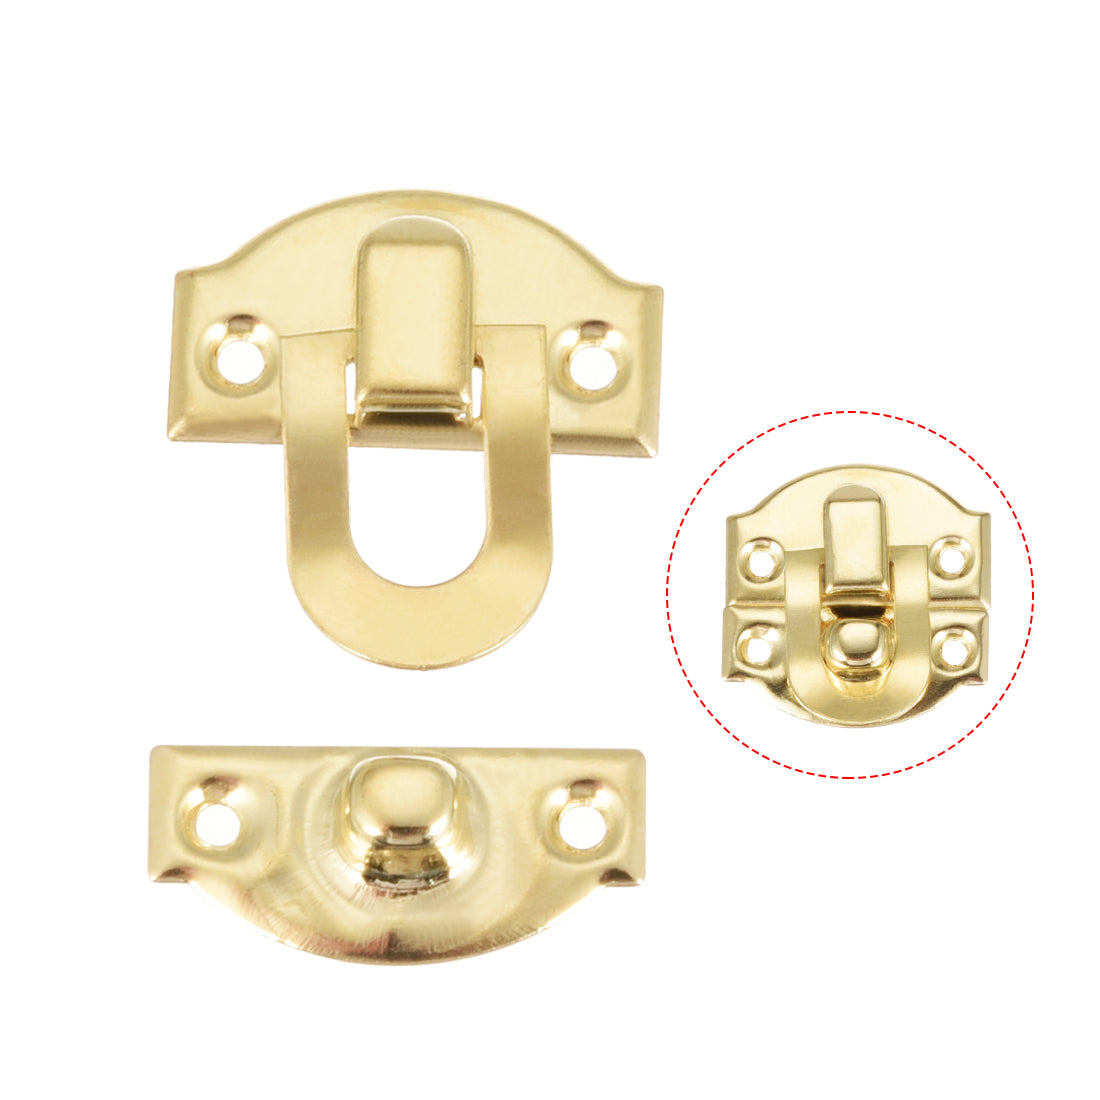 uxcell Uxcell Box Latch, Retro Style Small Size Golden Decorative Hasp Jewelry cases Catch w Screws 50Set